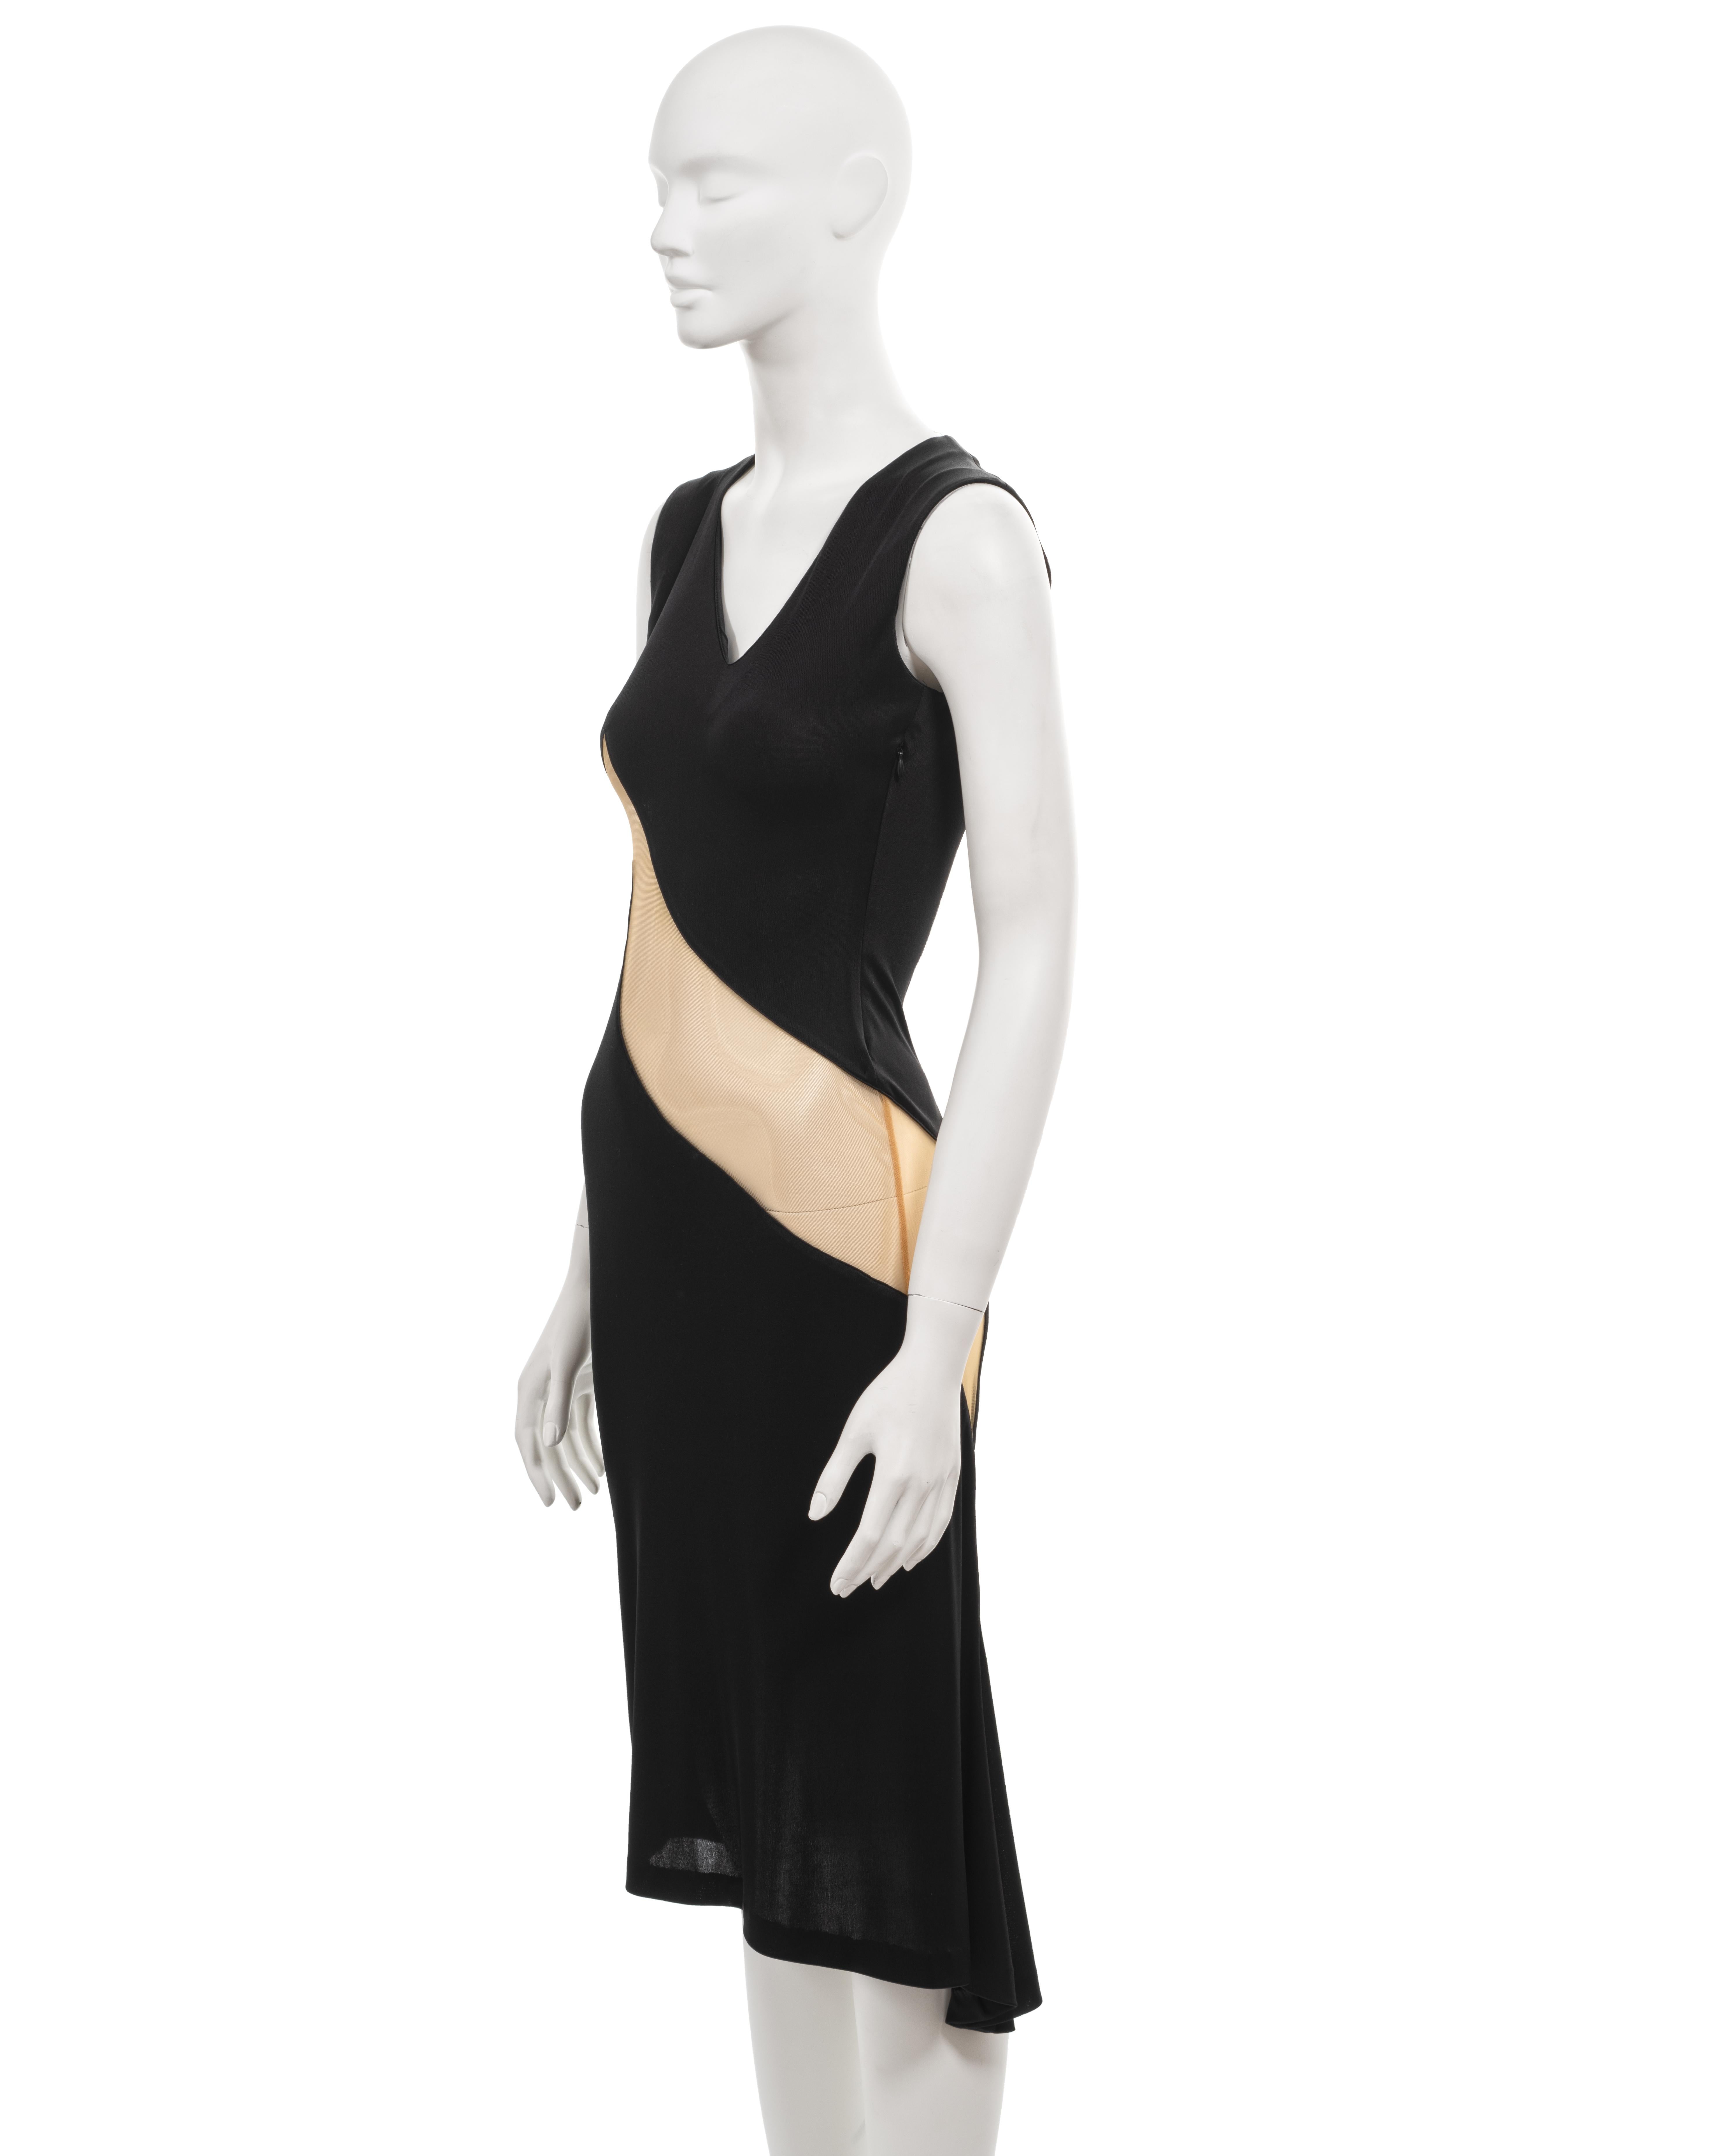 Alexander McQueen black acetate jersey dress with nude mesh insert, ss 1996 For Sale 6